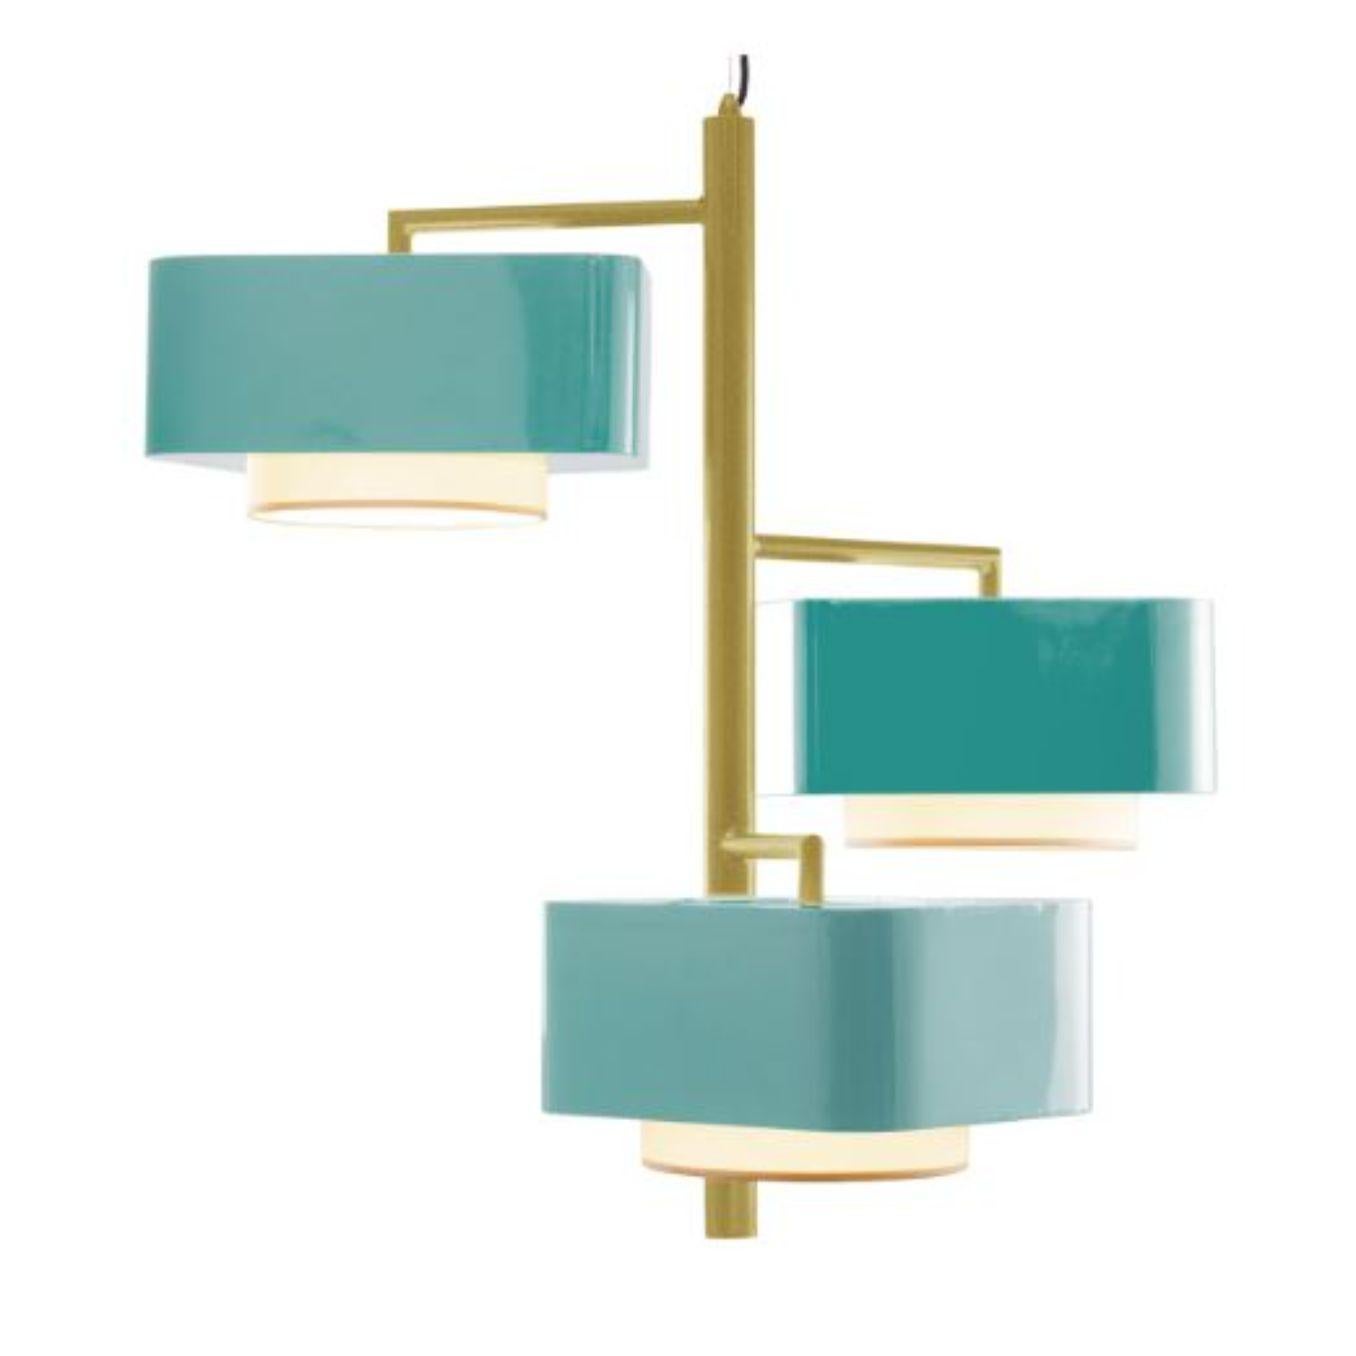 Gold and Mint Carousel I Suspension lamp by Dooq
Dimensions: W 97 x D 97 x H 86 cm
Materials: lacquered metal.
abat-jour: cotton
Also available in different colors.

Information:
230V/50Hz
E27/3x20W LED
120V/60Hz
E26/3x15W LED
bulbs not